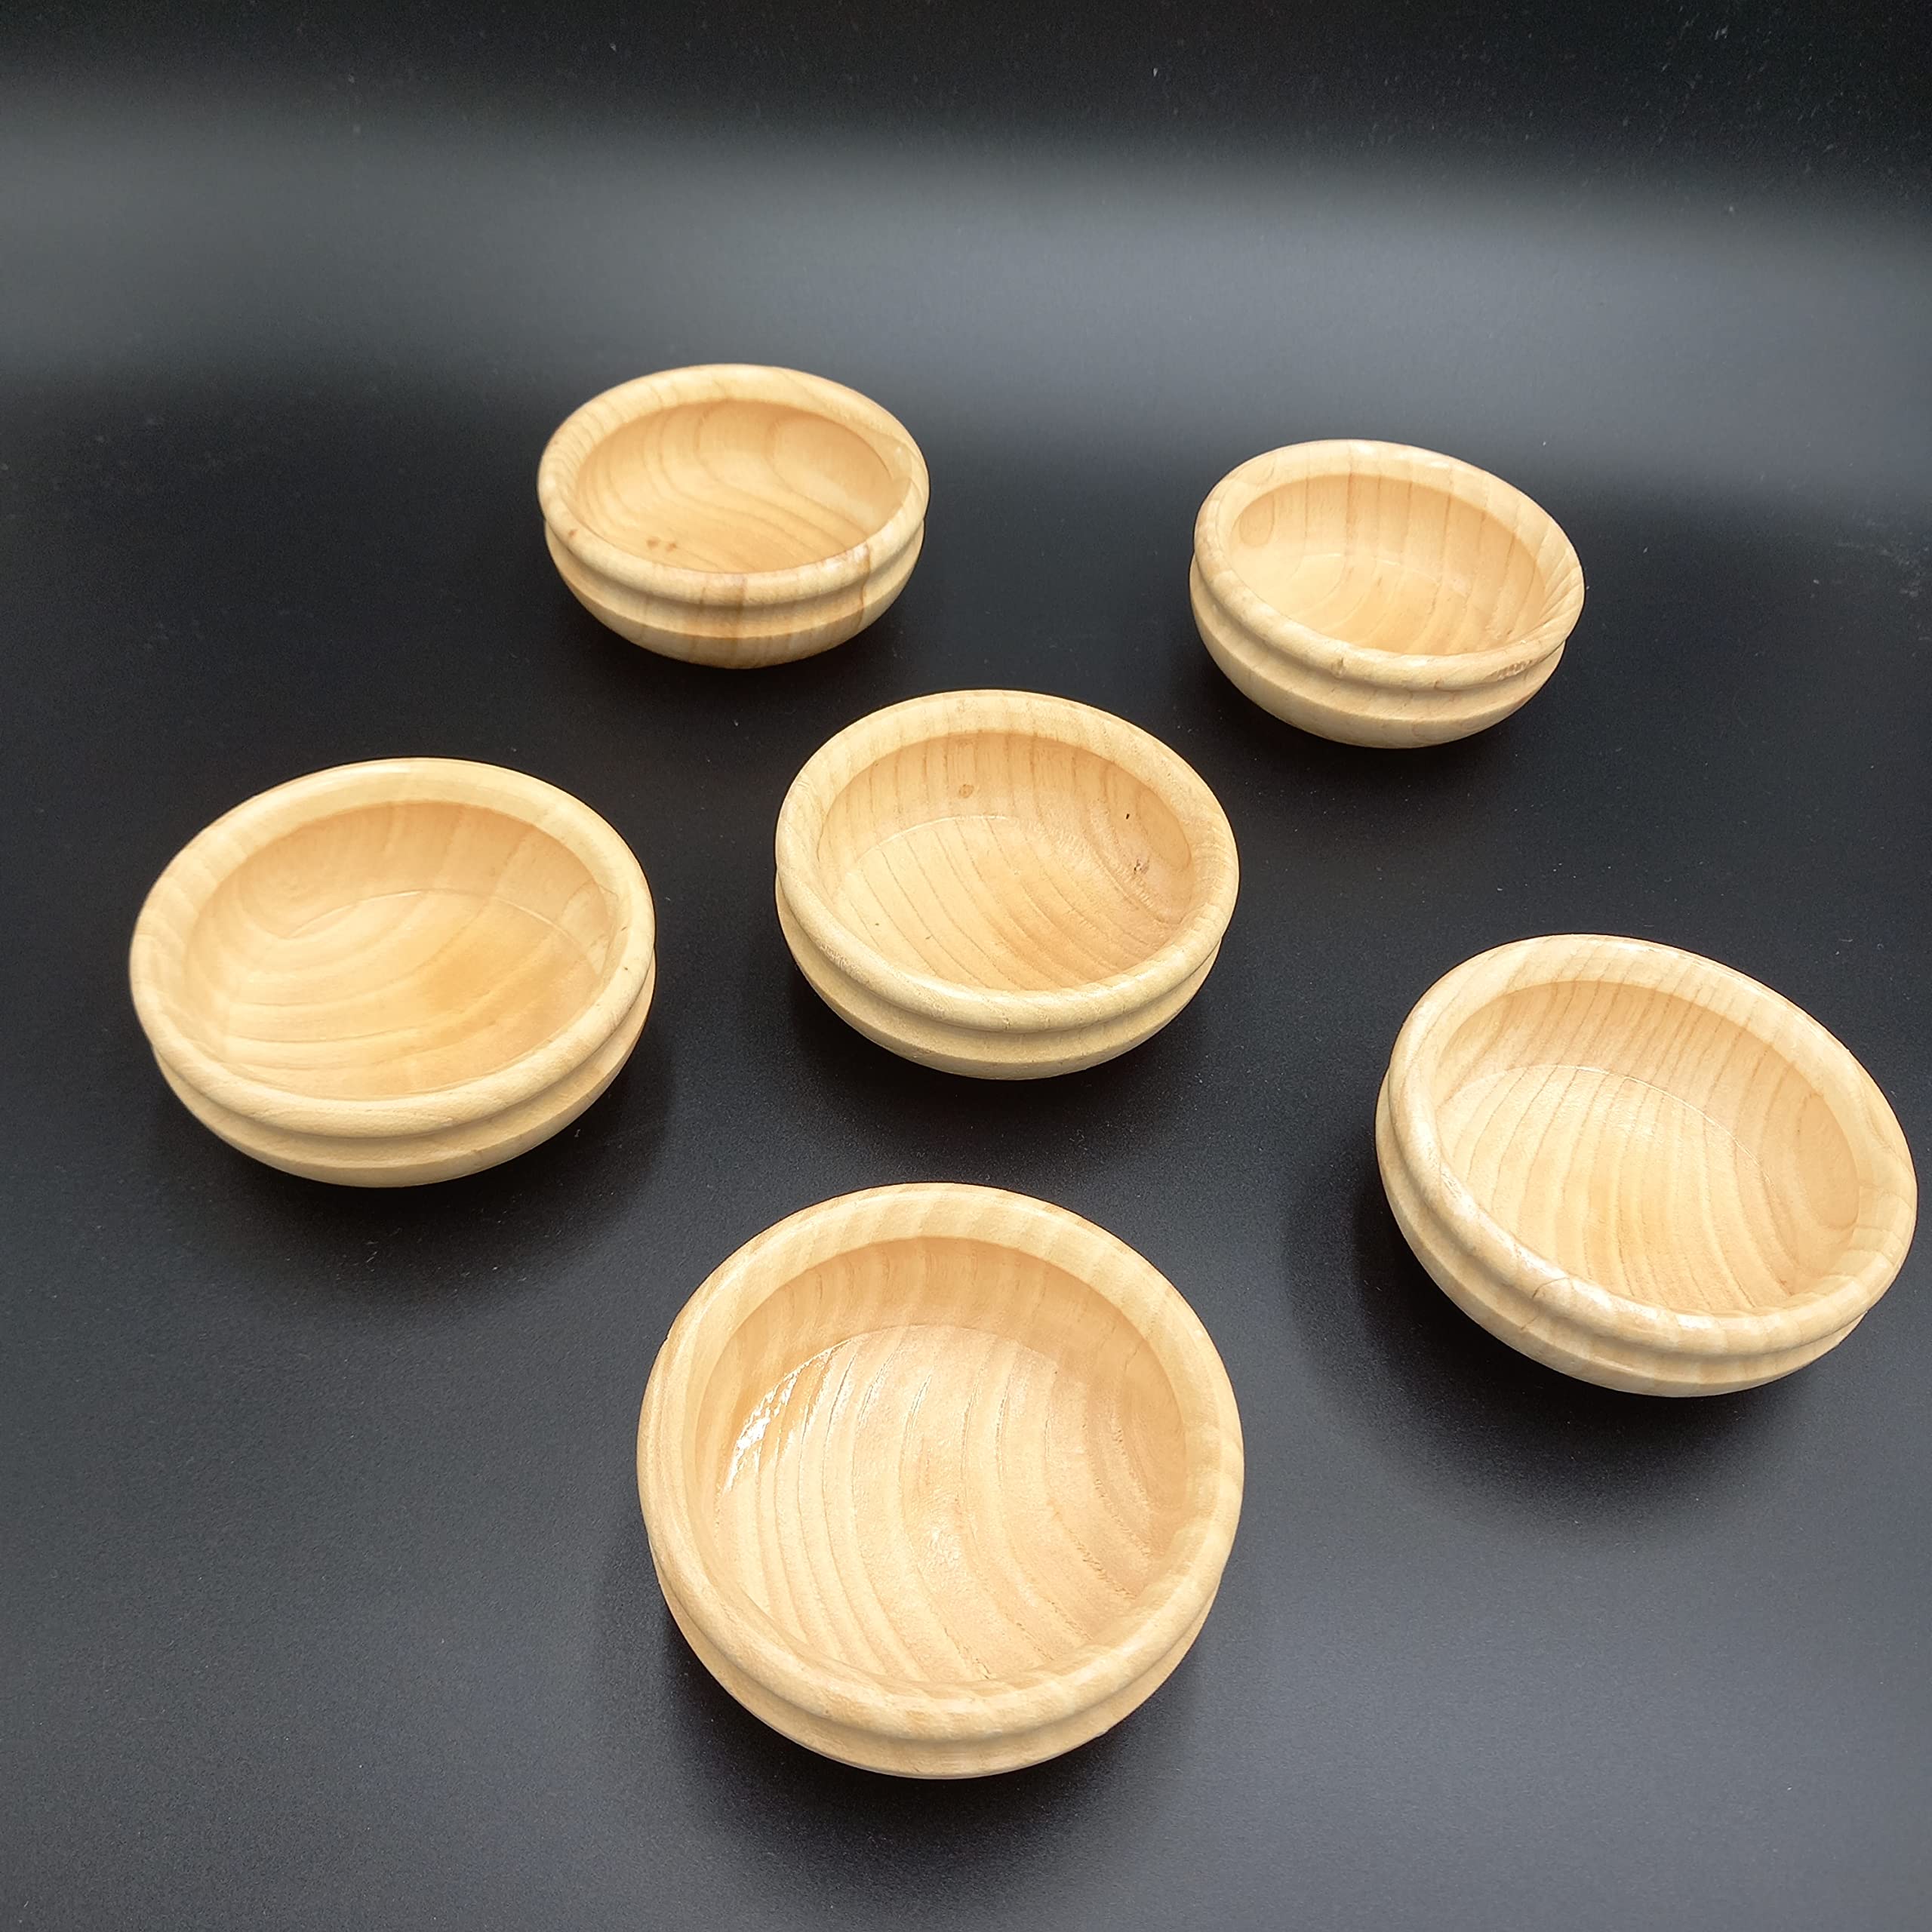 Tubibu Set of 6 Ash Wood Mini Bowls Set, Handmade, Handcrafted Wooden Mini Bowls, Pinch Bowls, Condiment Cups, Salt Cellars, Dip Sauce, Nuts, Candy, Fruits, Appetizer, and Snacks